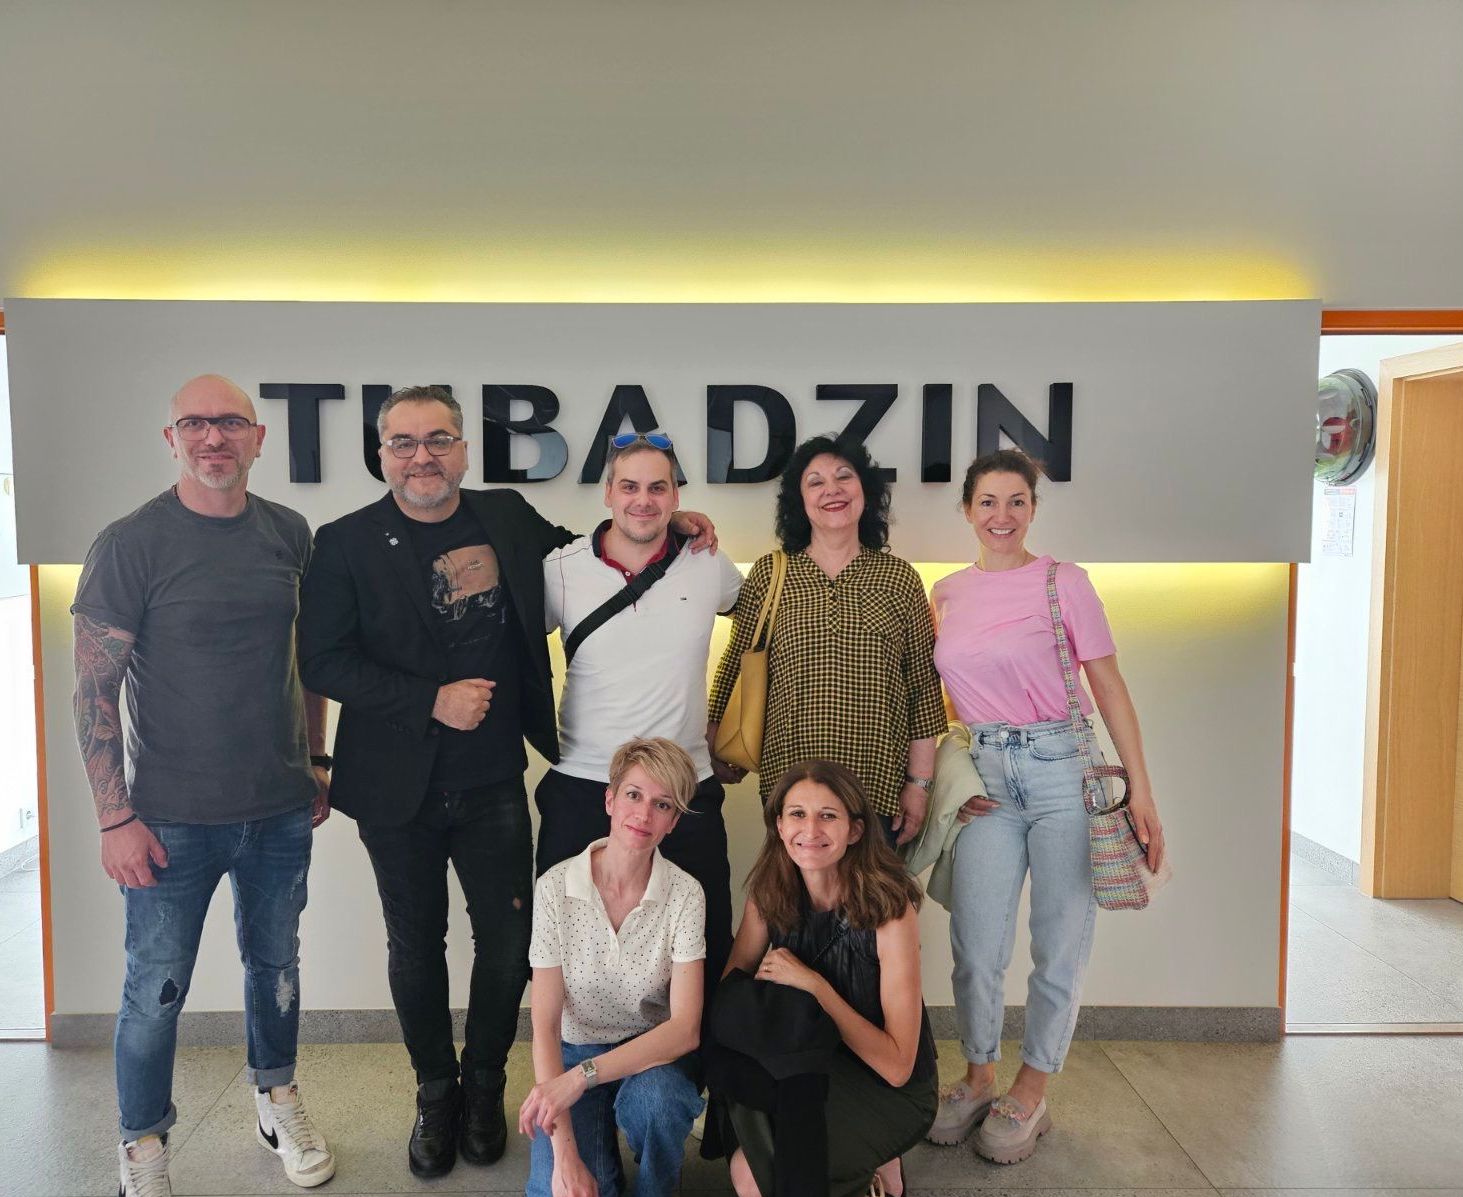 Tubadzin Architect Academy in cooperation with Bulgarian architectural offices